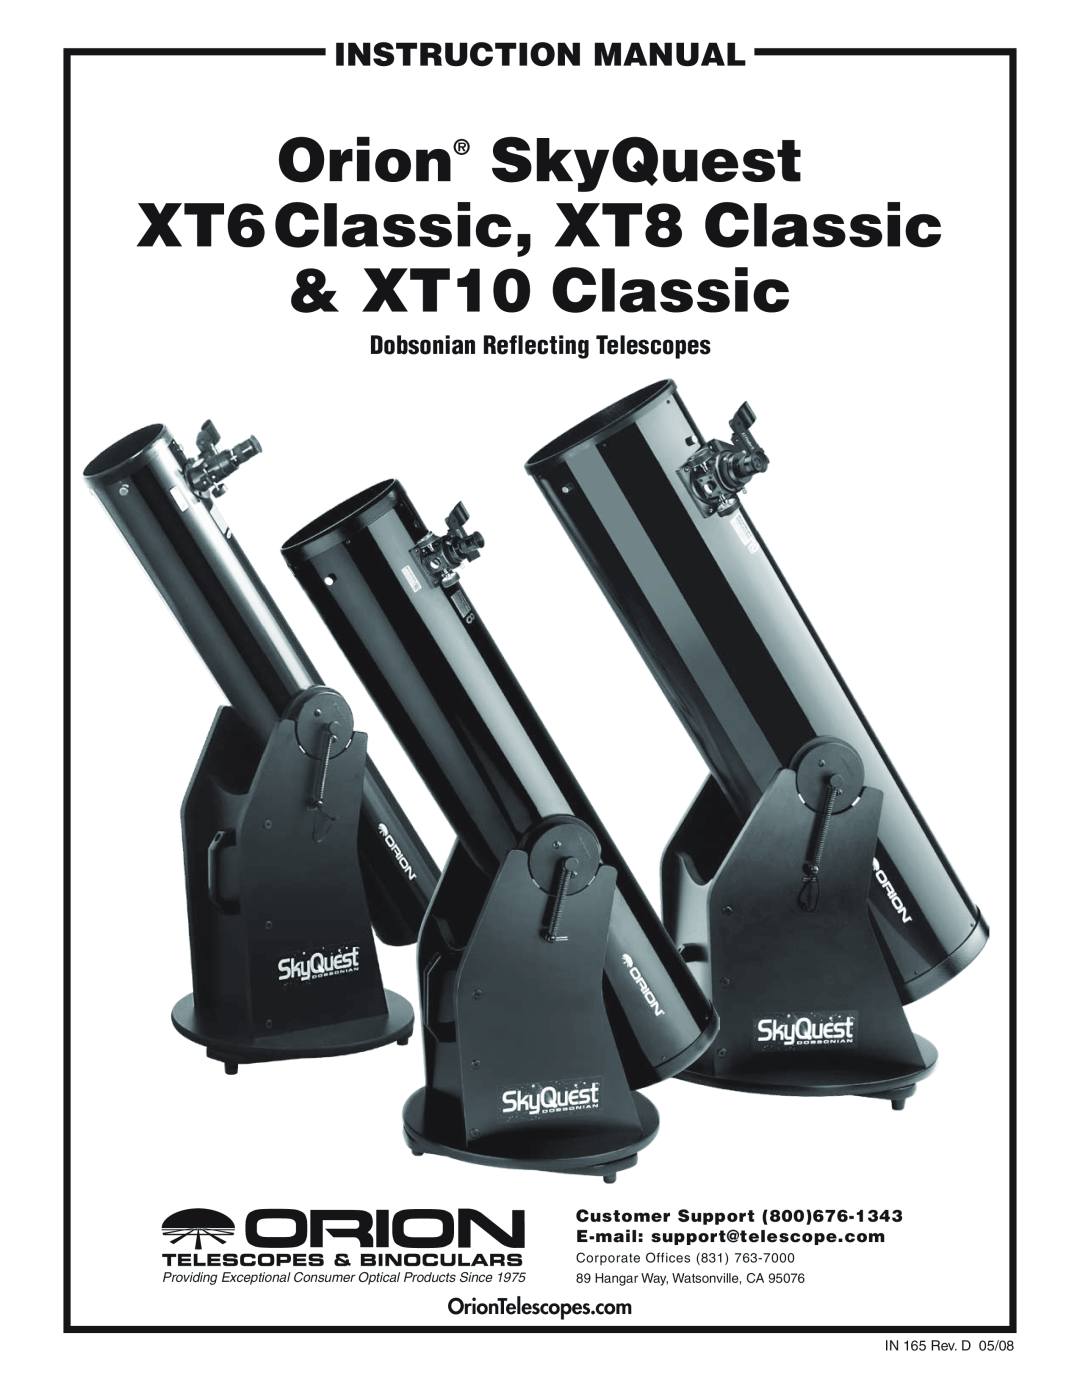 Orion XT10 CLASSIC instruction manual Dobsonian Reflecting Telescopes, Customer Support, E-mail support@telescope.com 